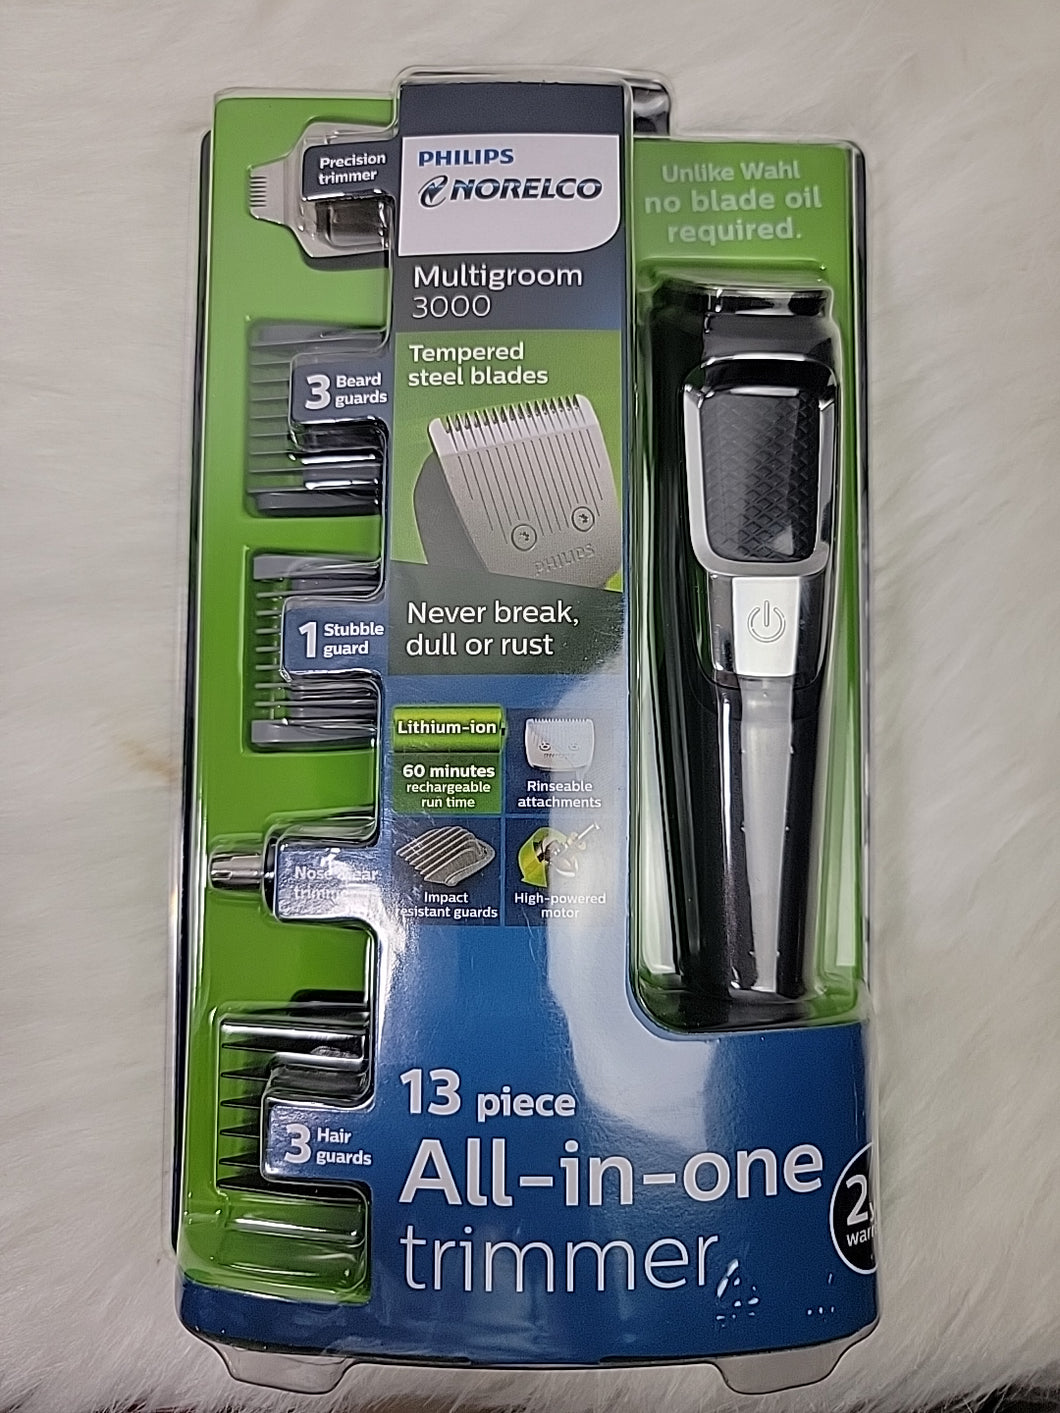 Norelco 3000 All-in-one Trimmer